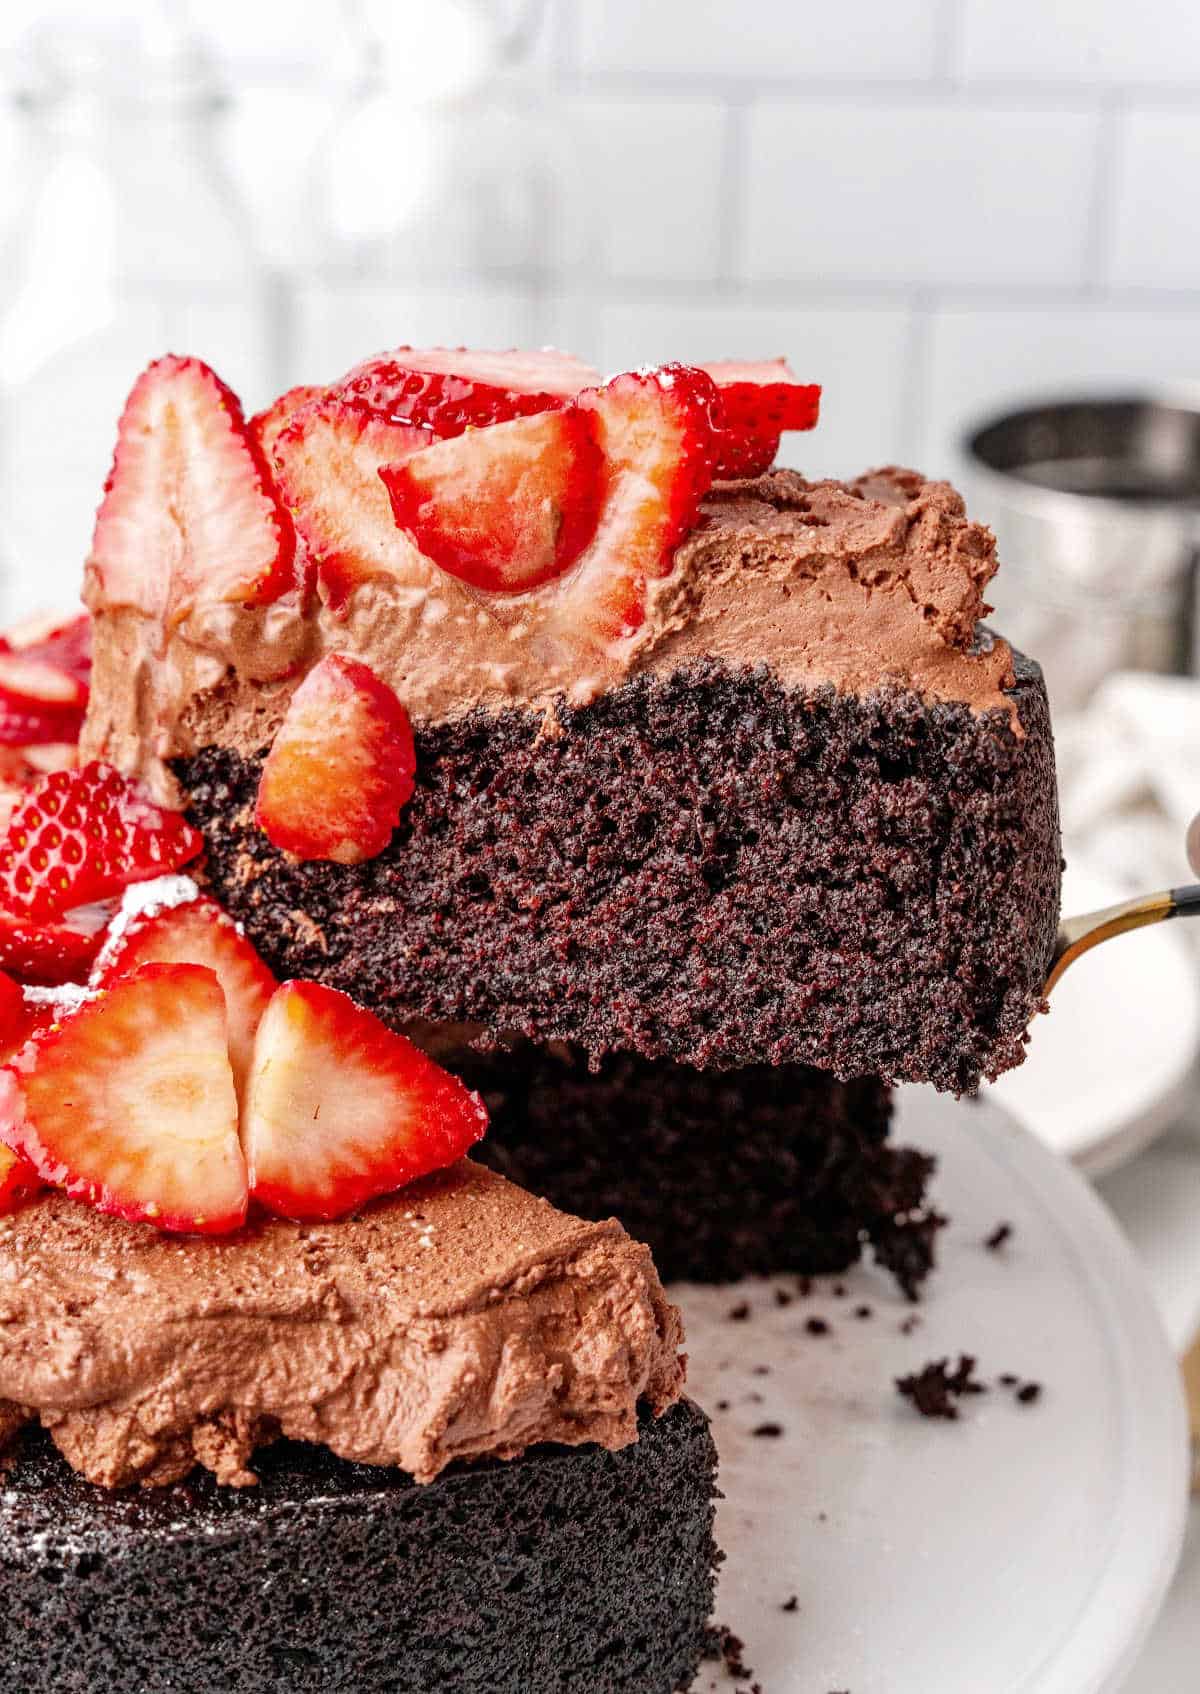 Slice of chocolate mousse cake with strawberries being lifted from whole cake.